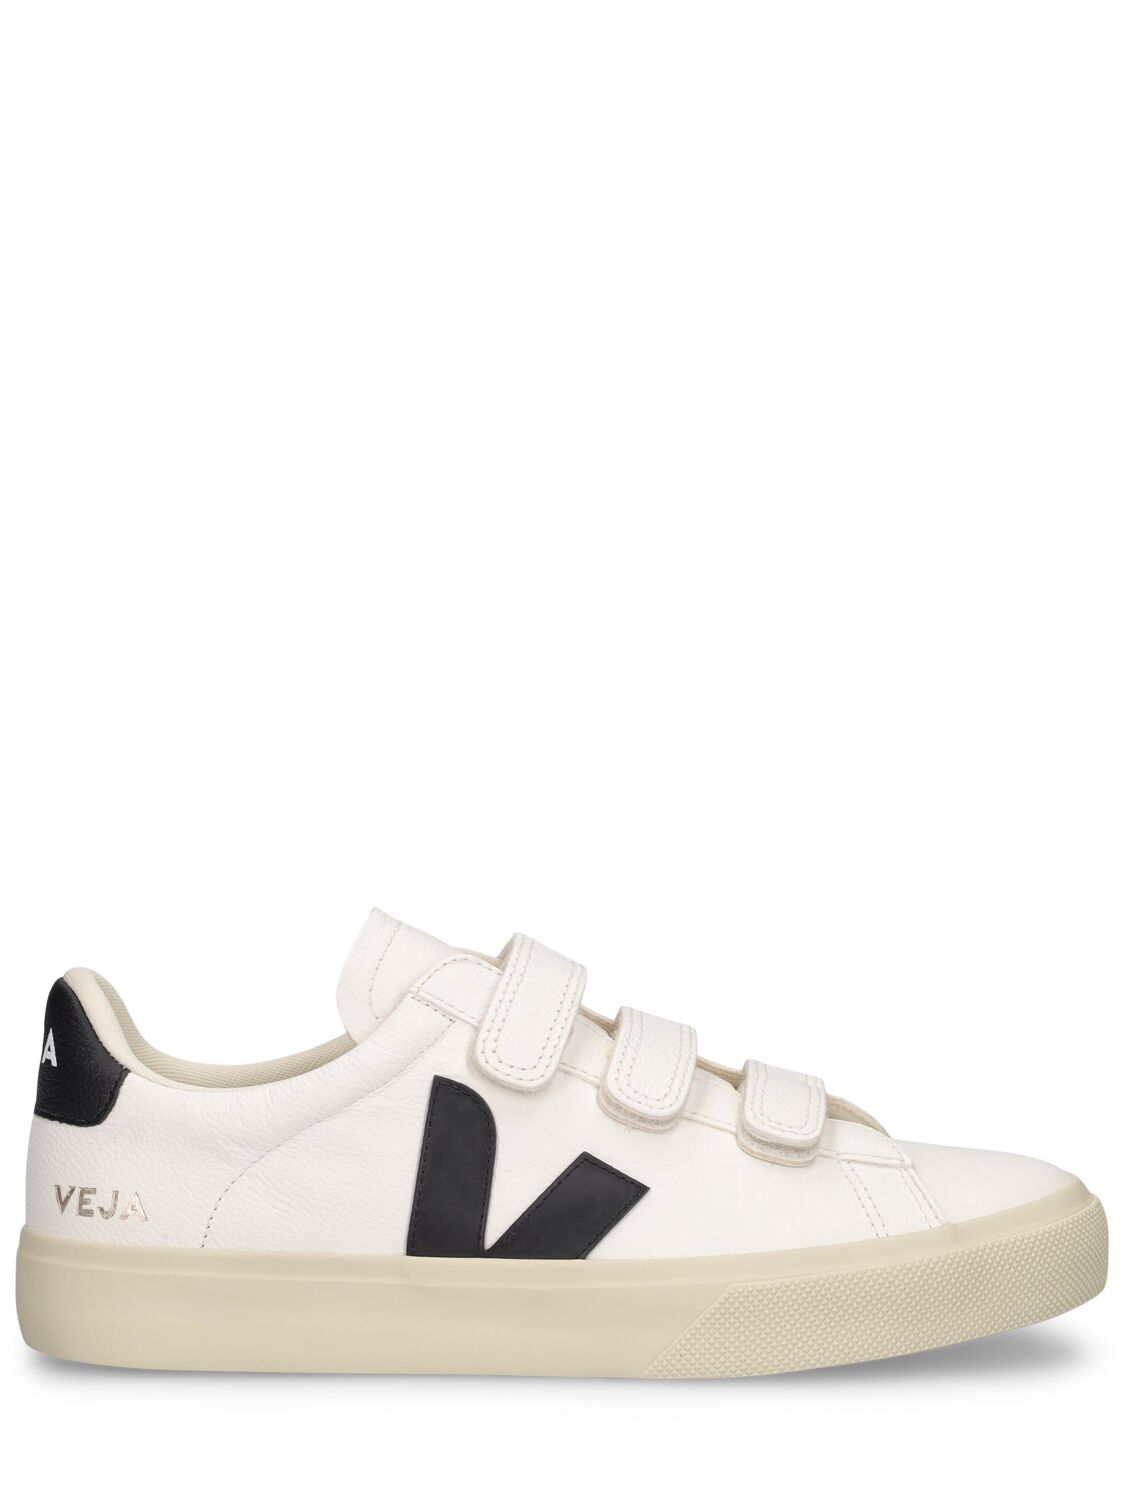 Veja Recife Leather Trainers In White